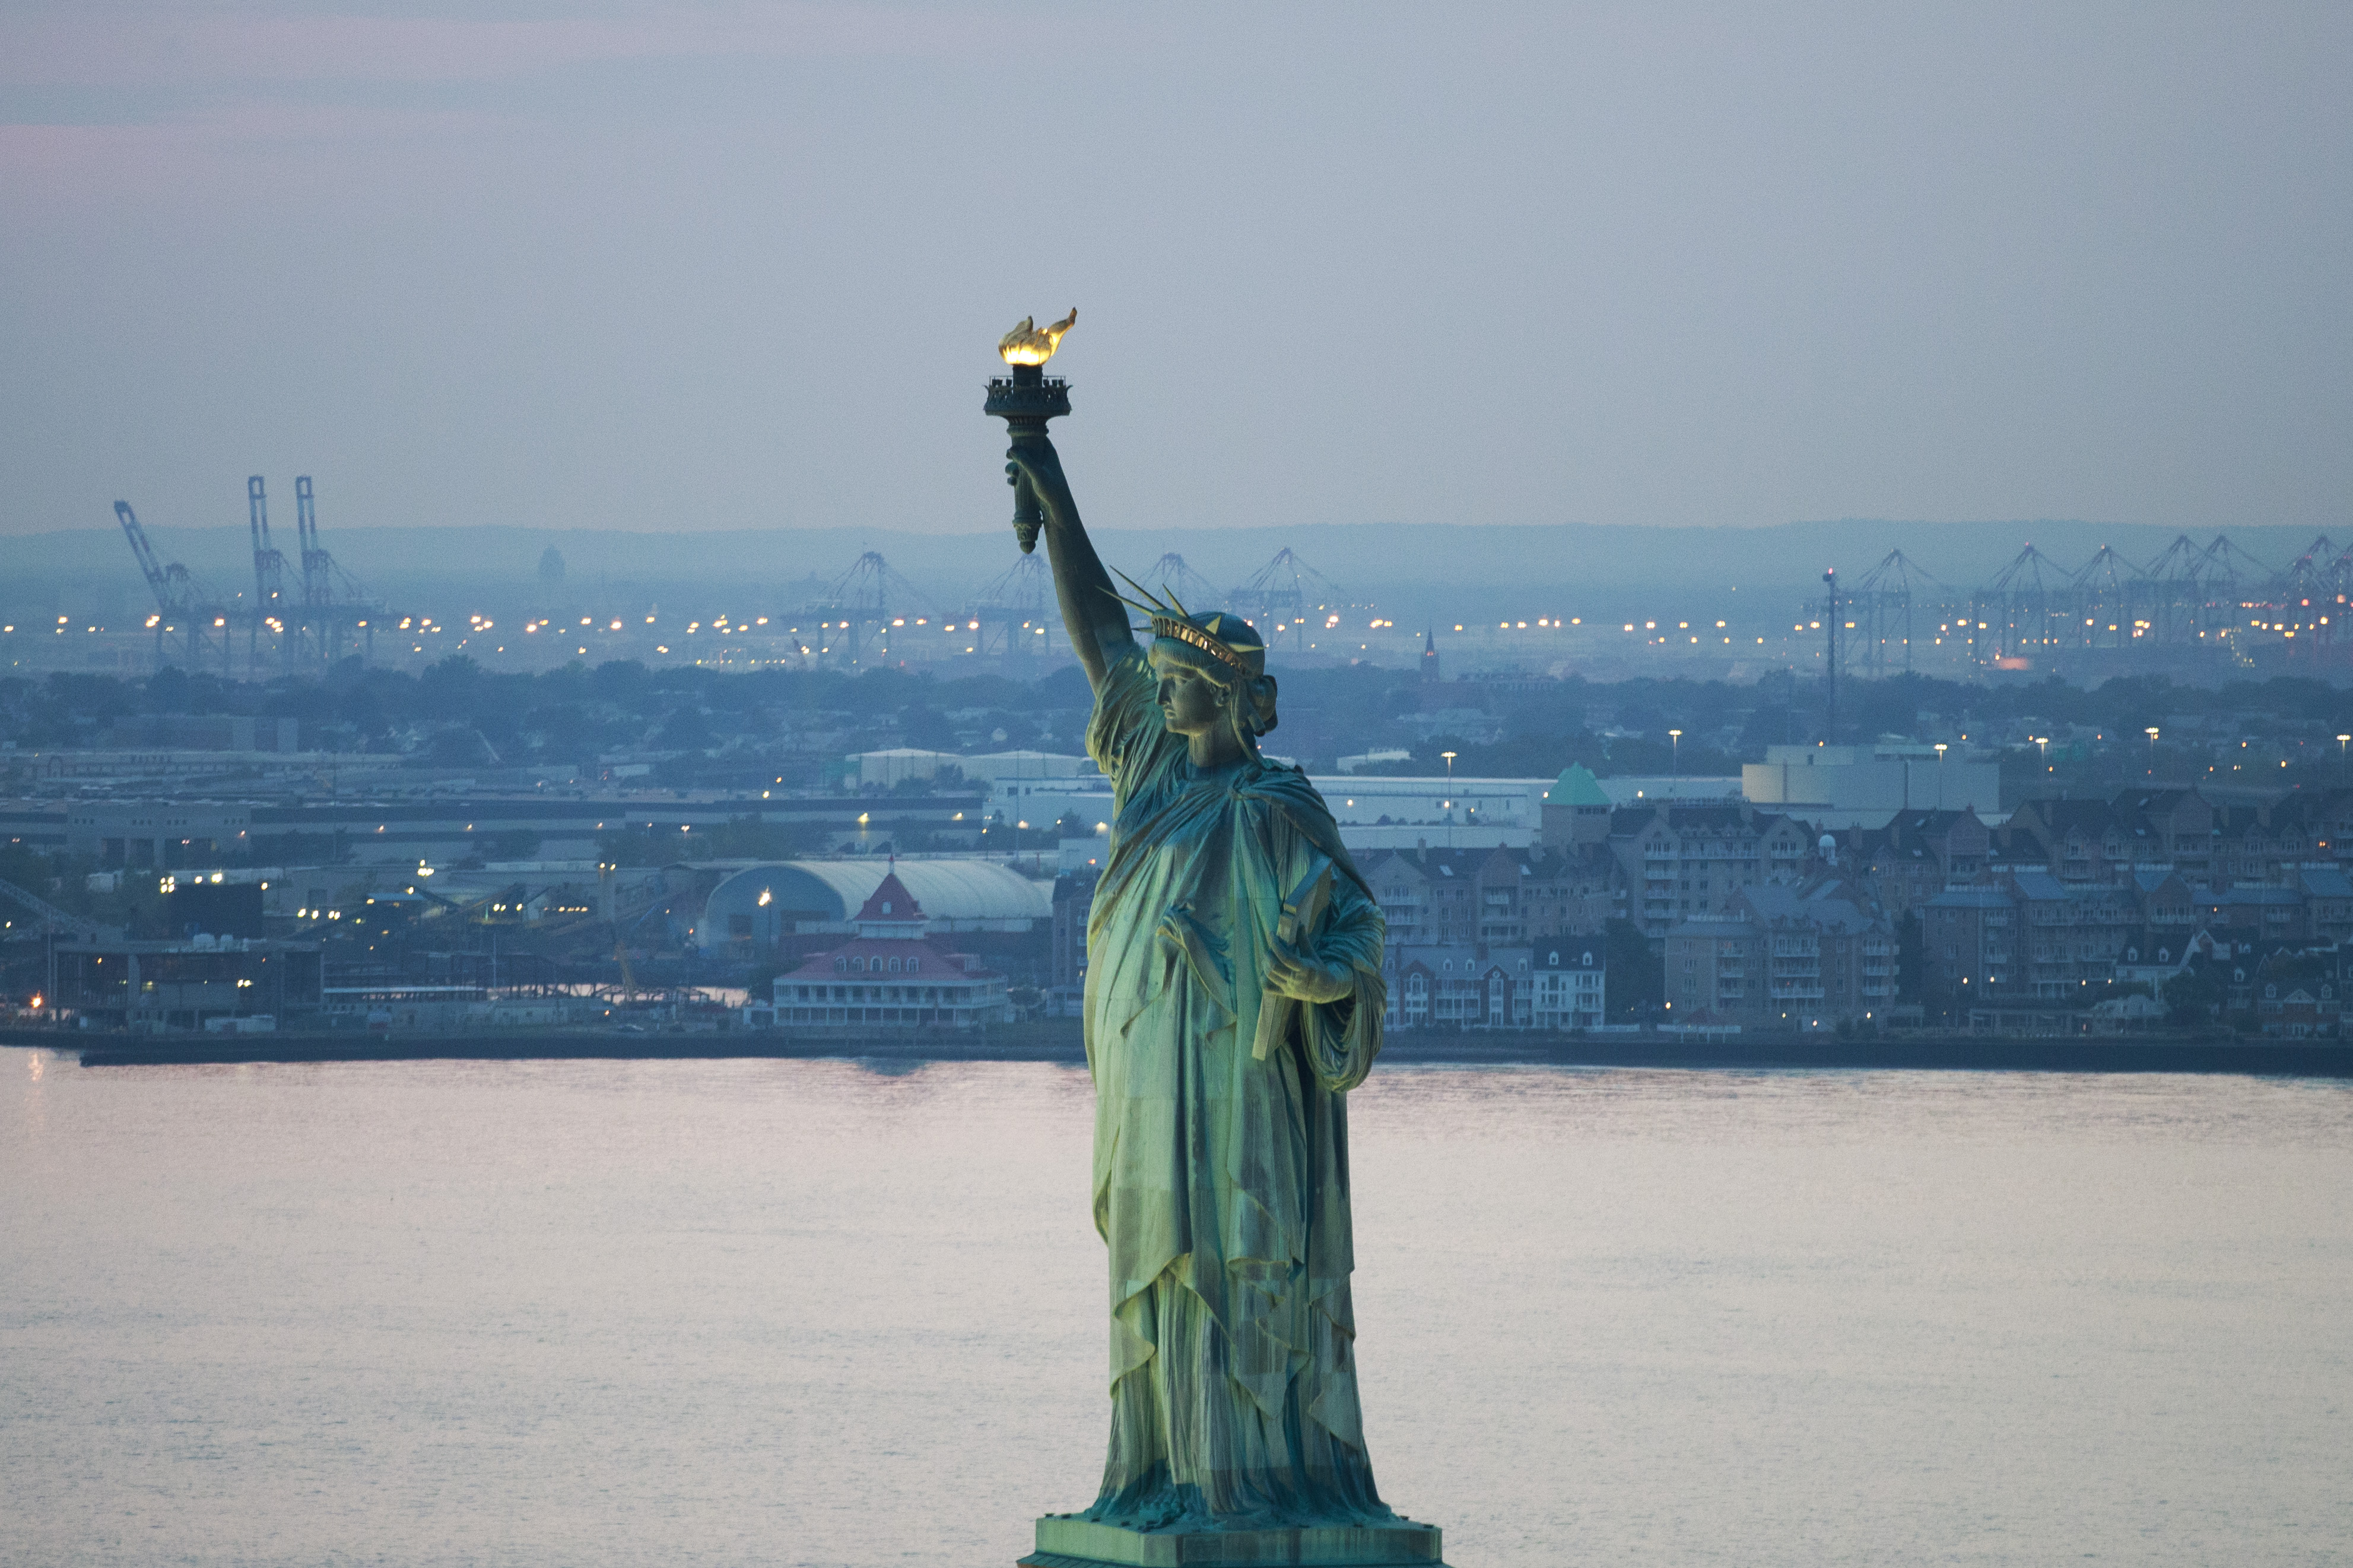 Donald Trump Immigration: Statue of Liberty Poem's History | Time